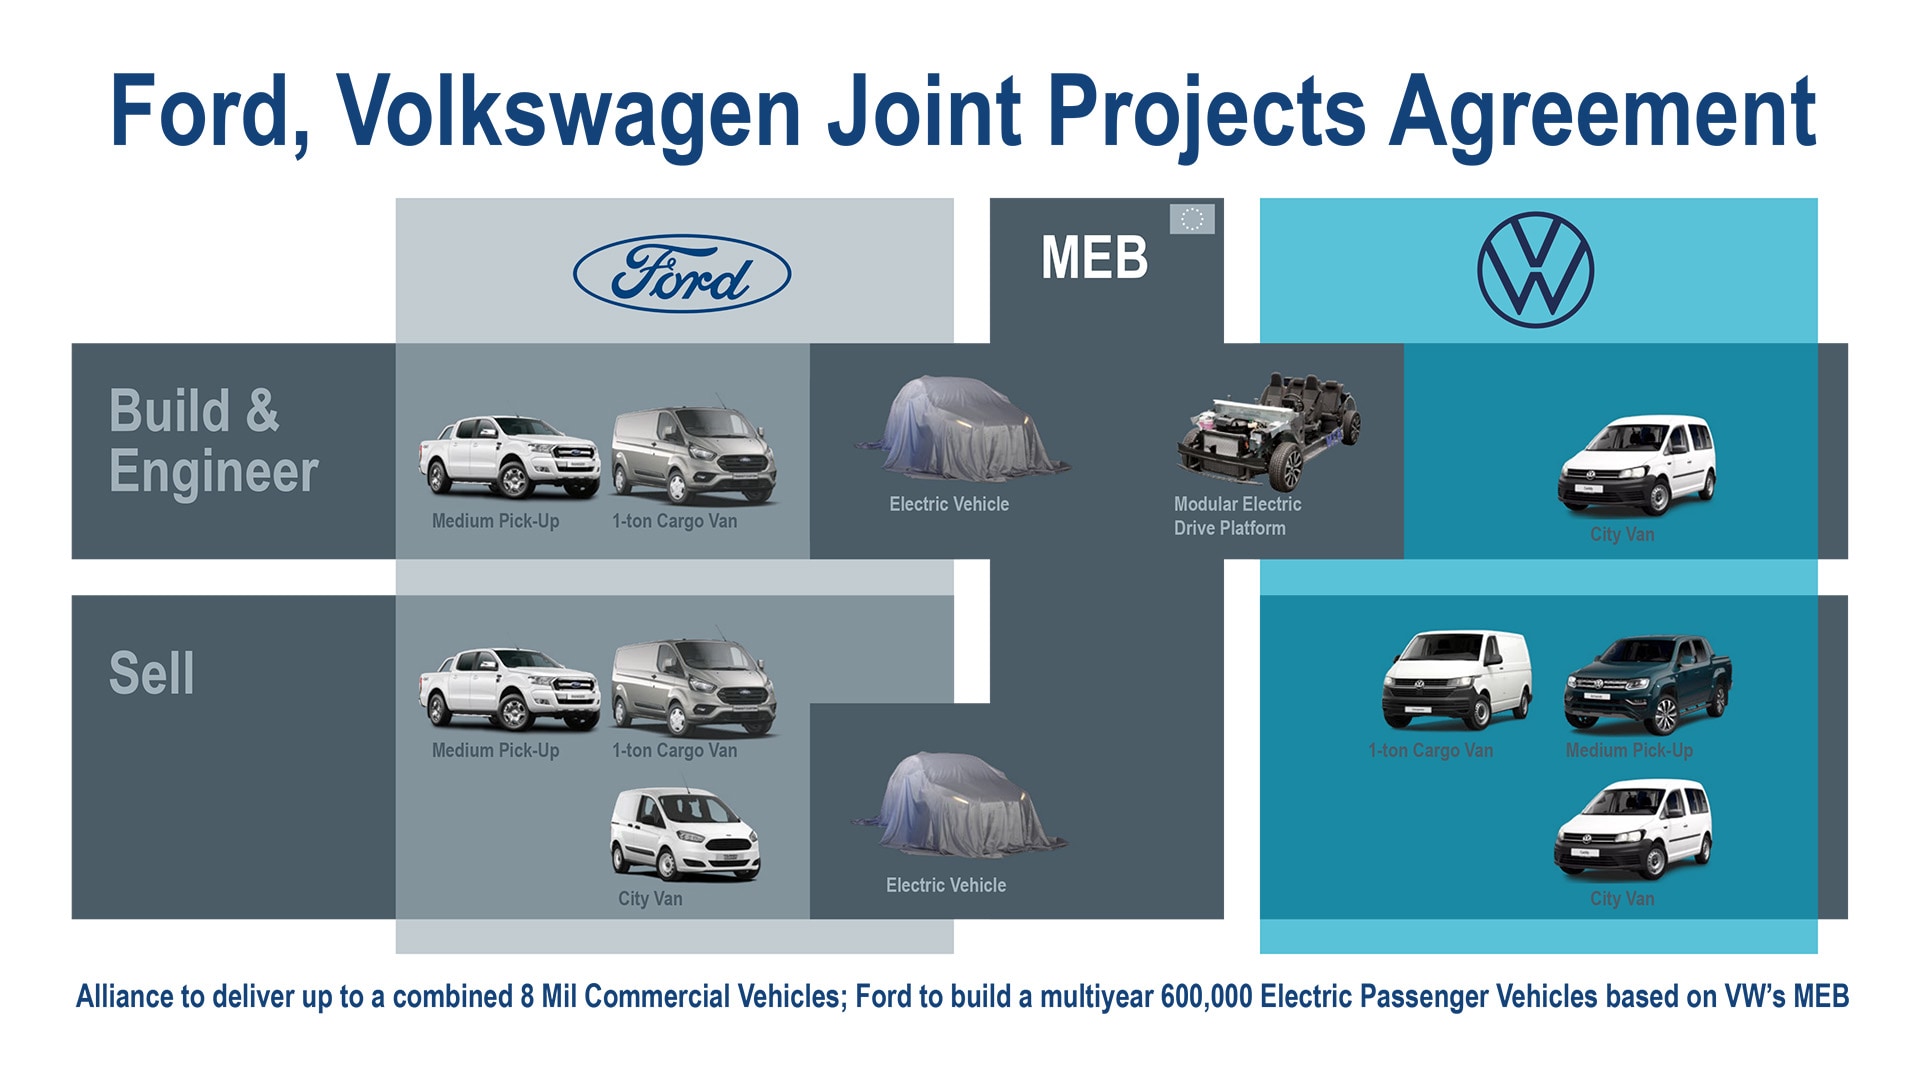 Ford, Volkswagen Sign Agreements for Joint Projects On Commercial